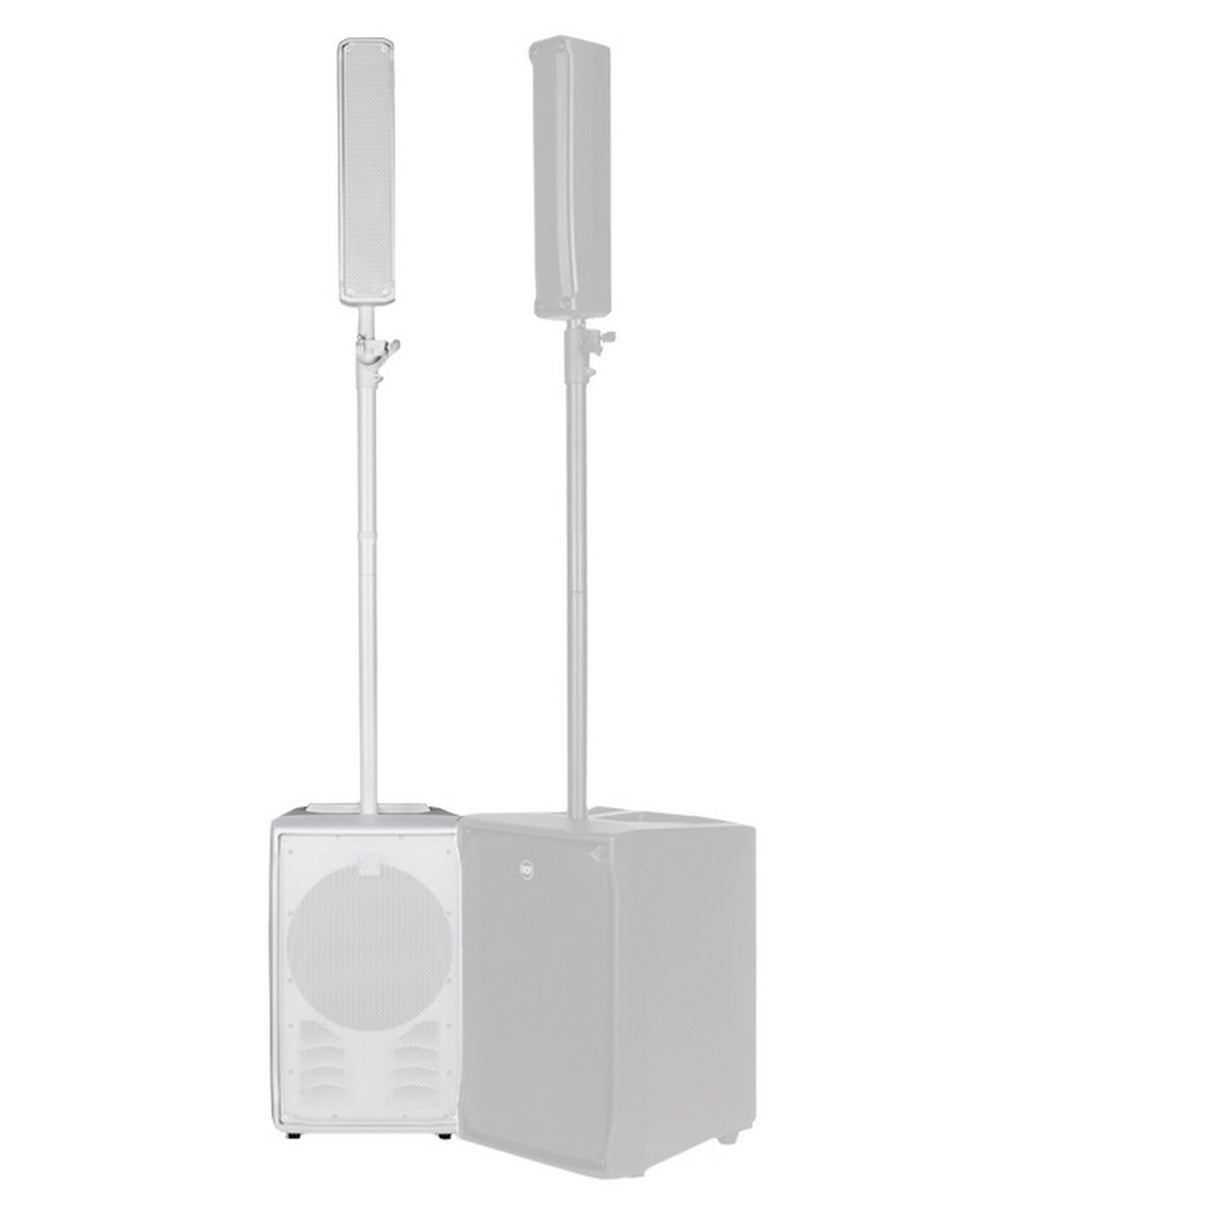 RCF EVOX J8 W | 1400 Watt Active Two Way Portable Array Speaker with 12 Inch Subwoofer White